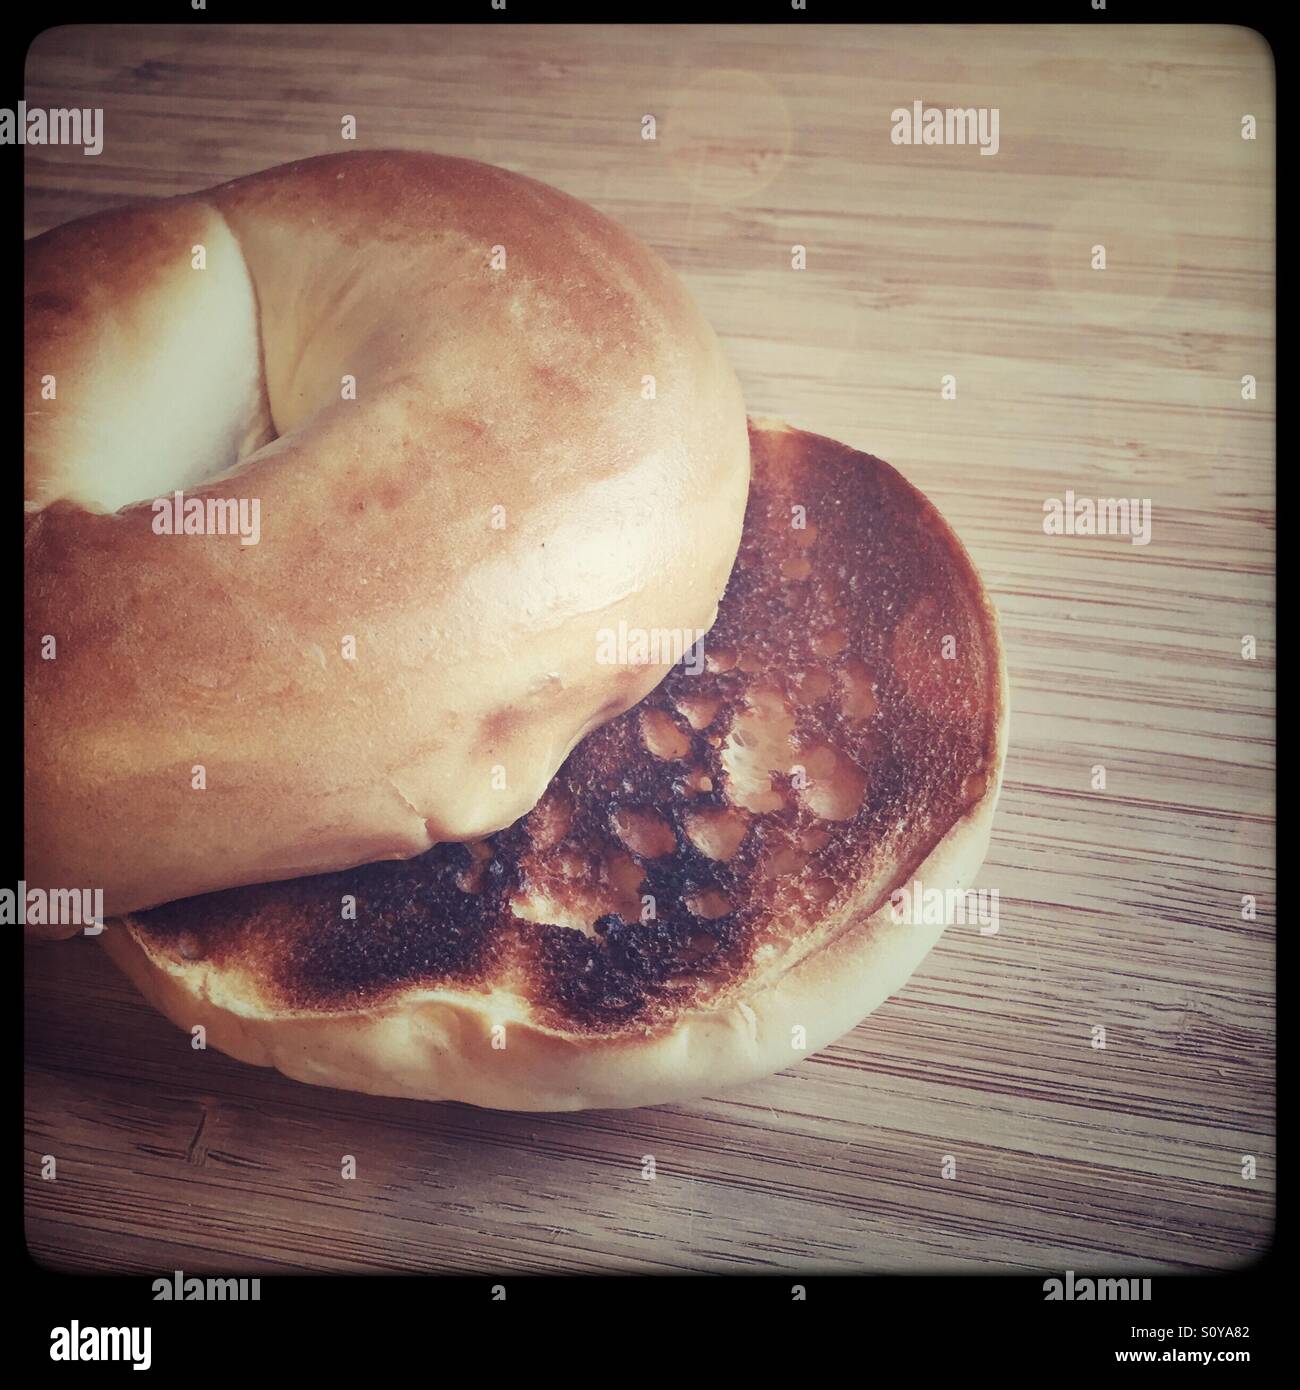 Plain toasted bagel on wood cutting board Stock Photo